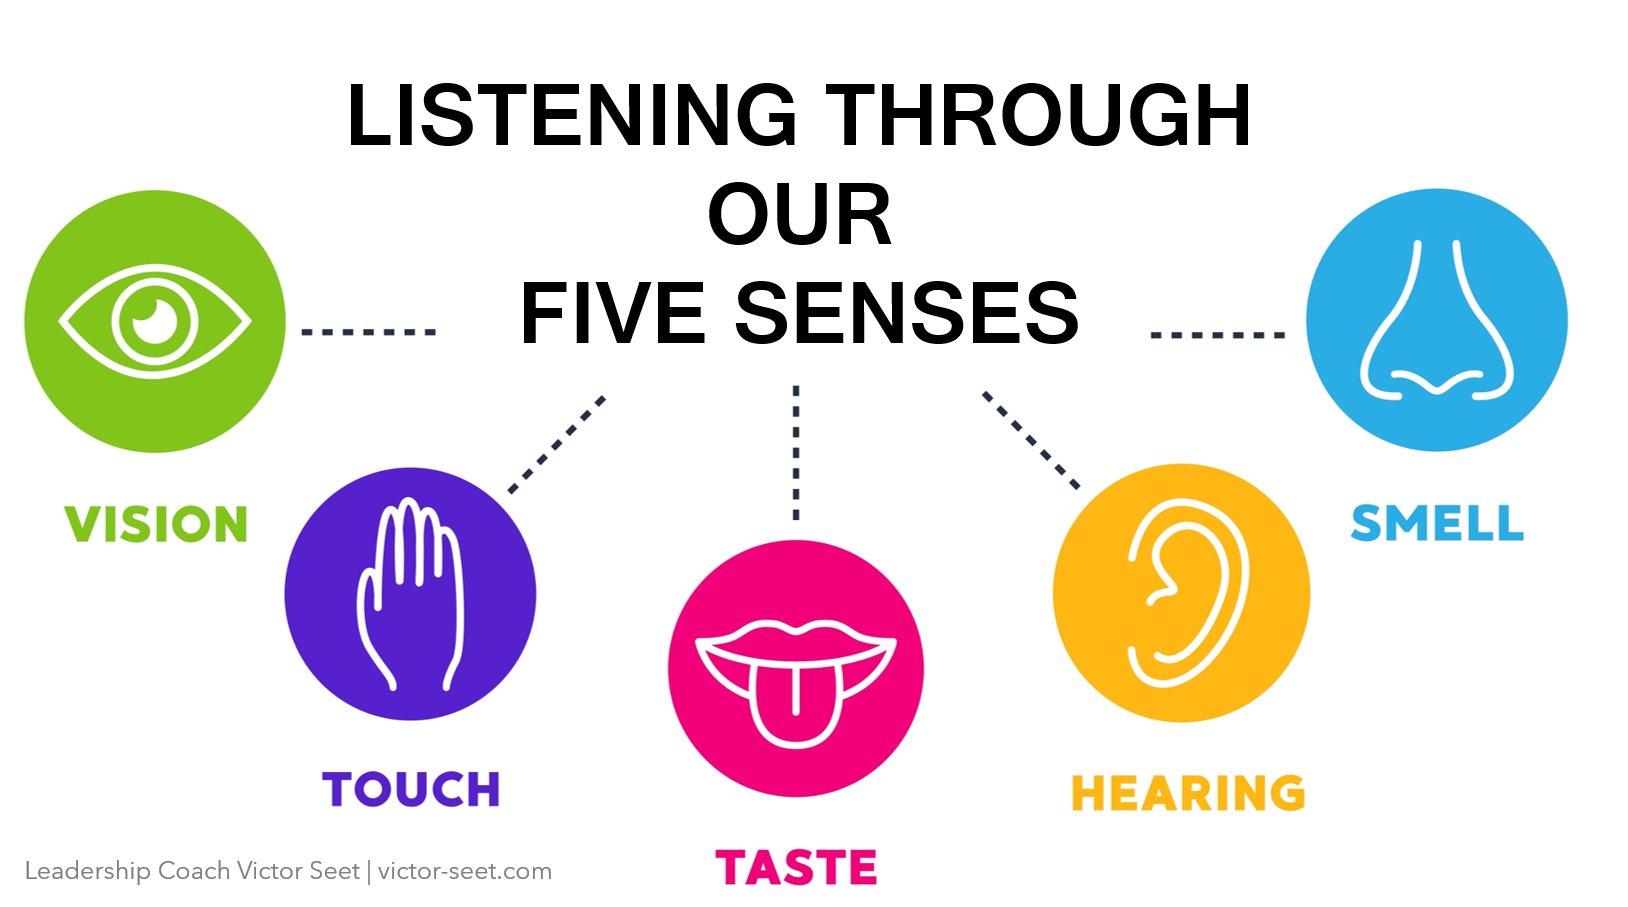 What are the 5 senses of communication?